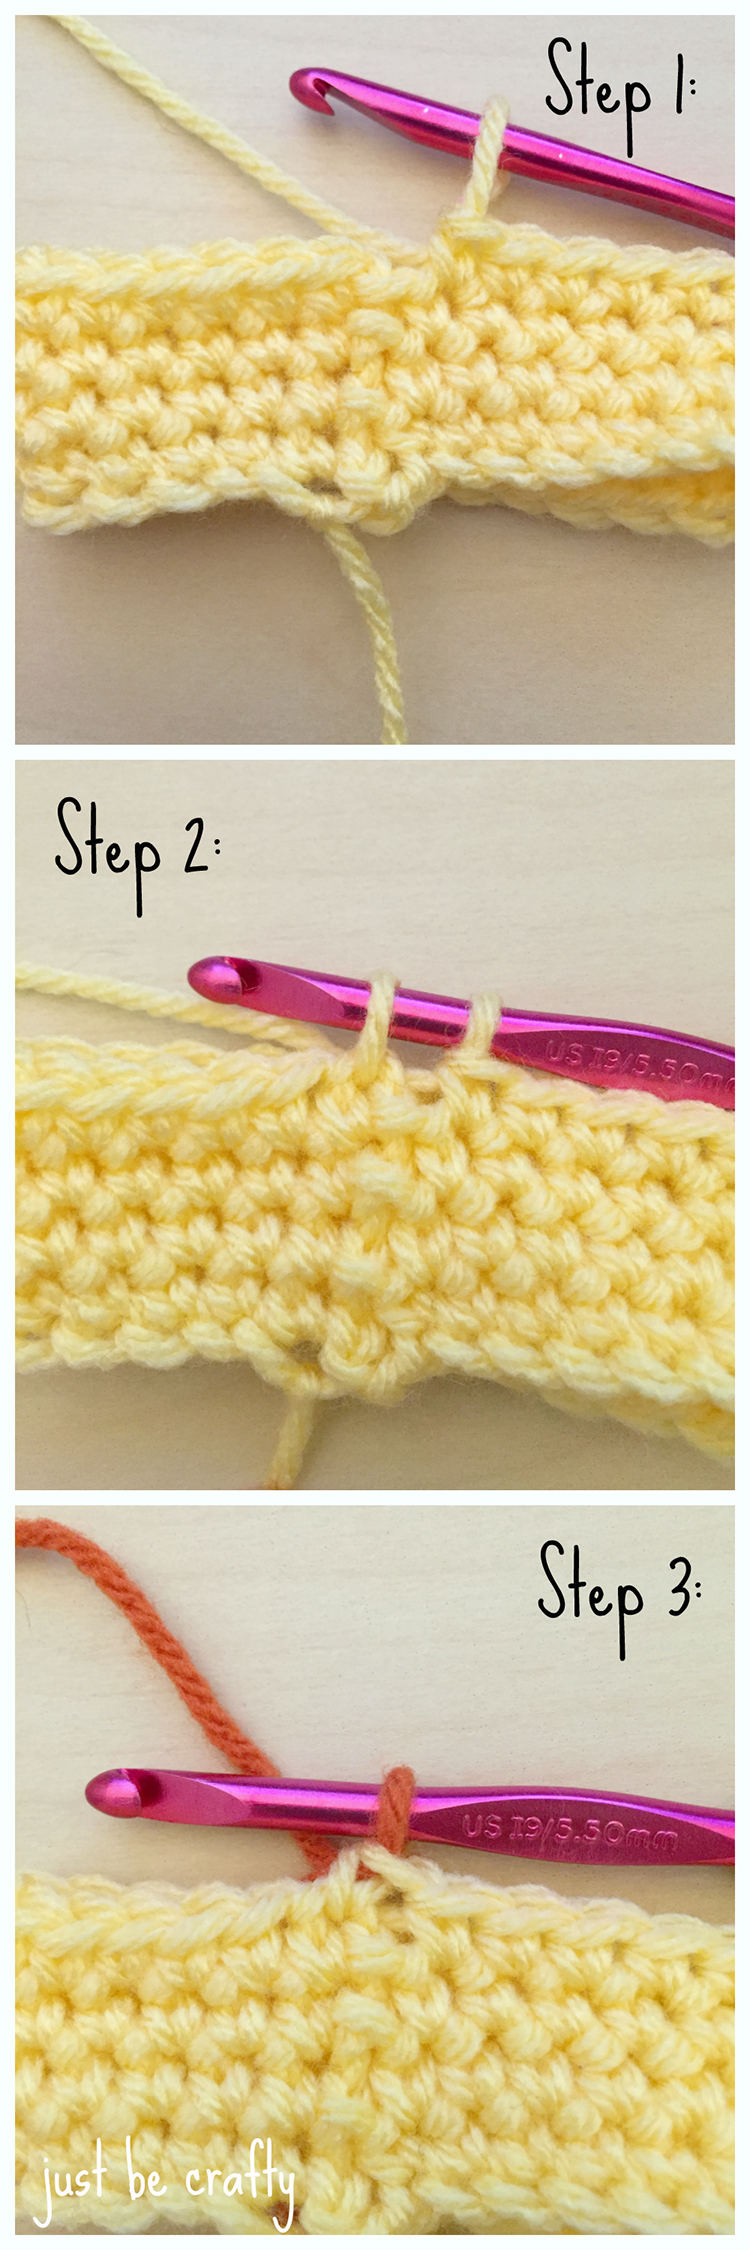 How to easily change colors in crochet